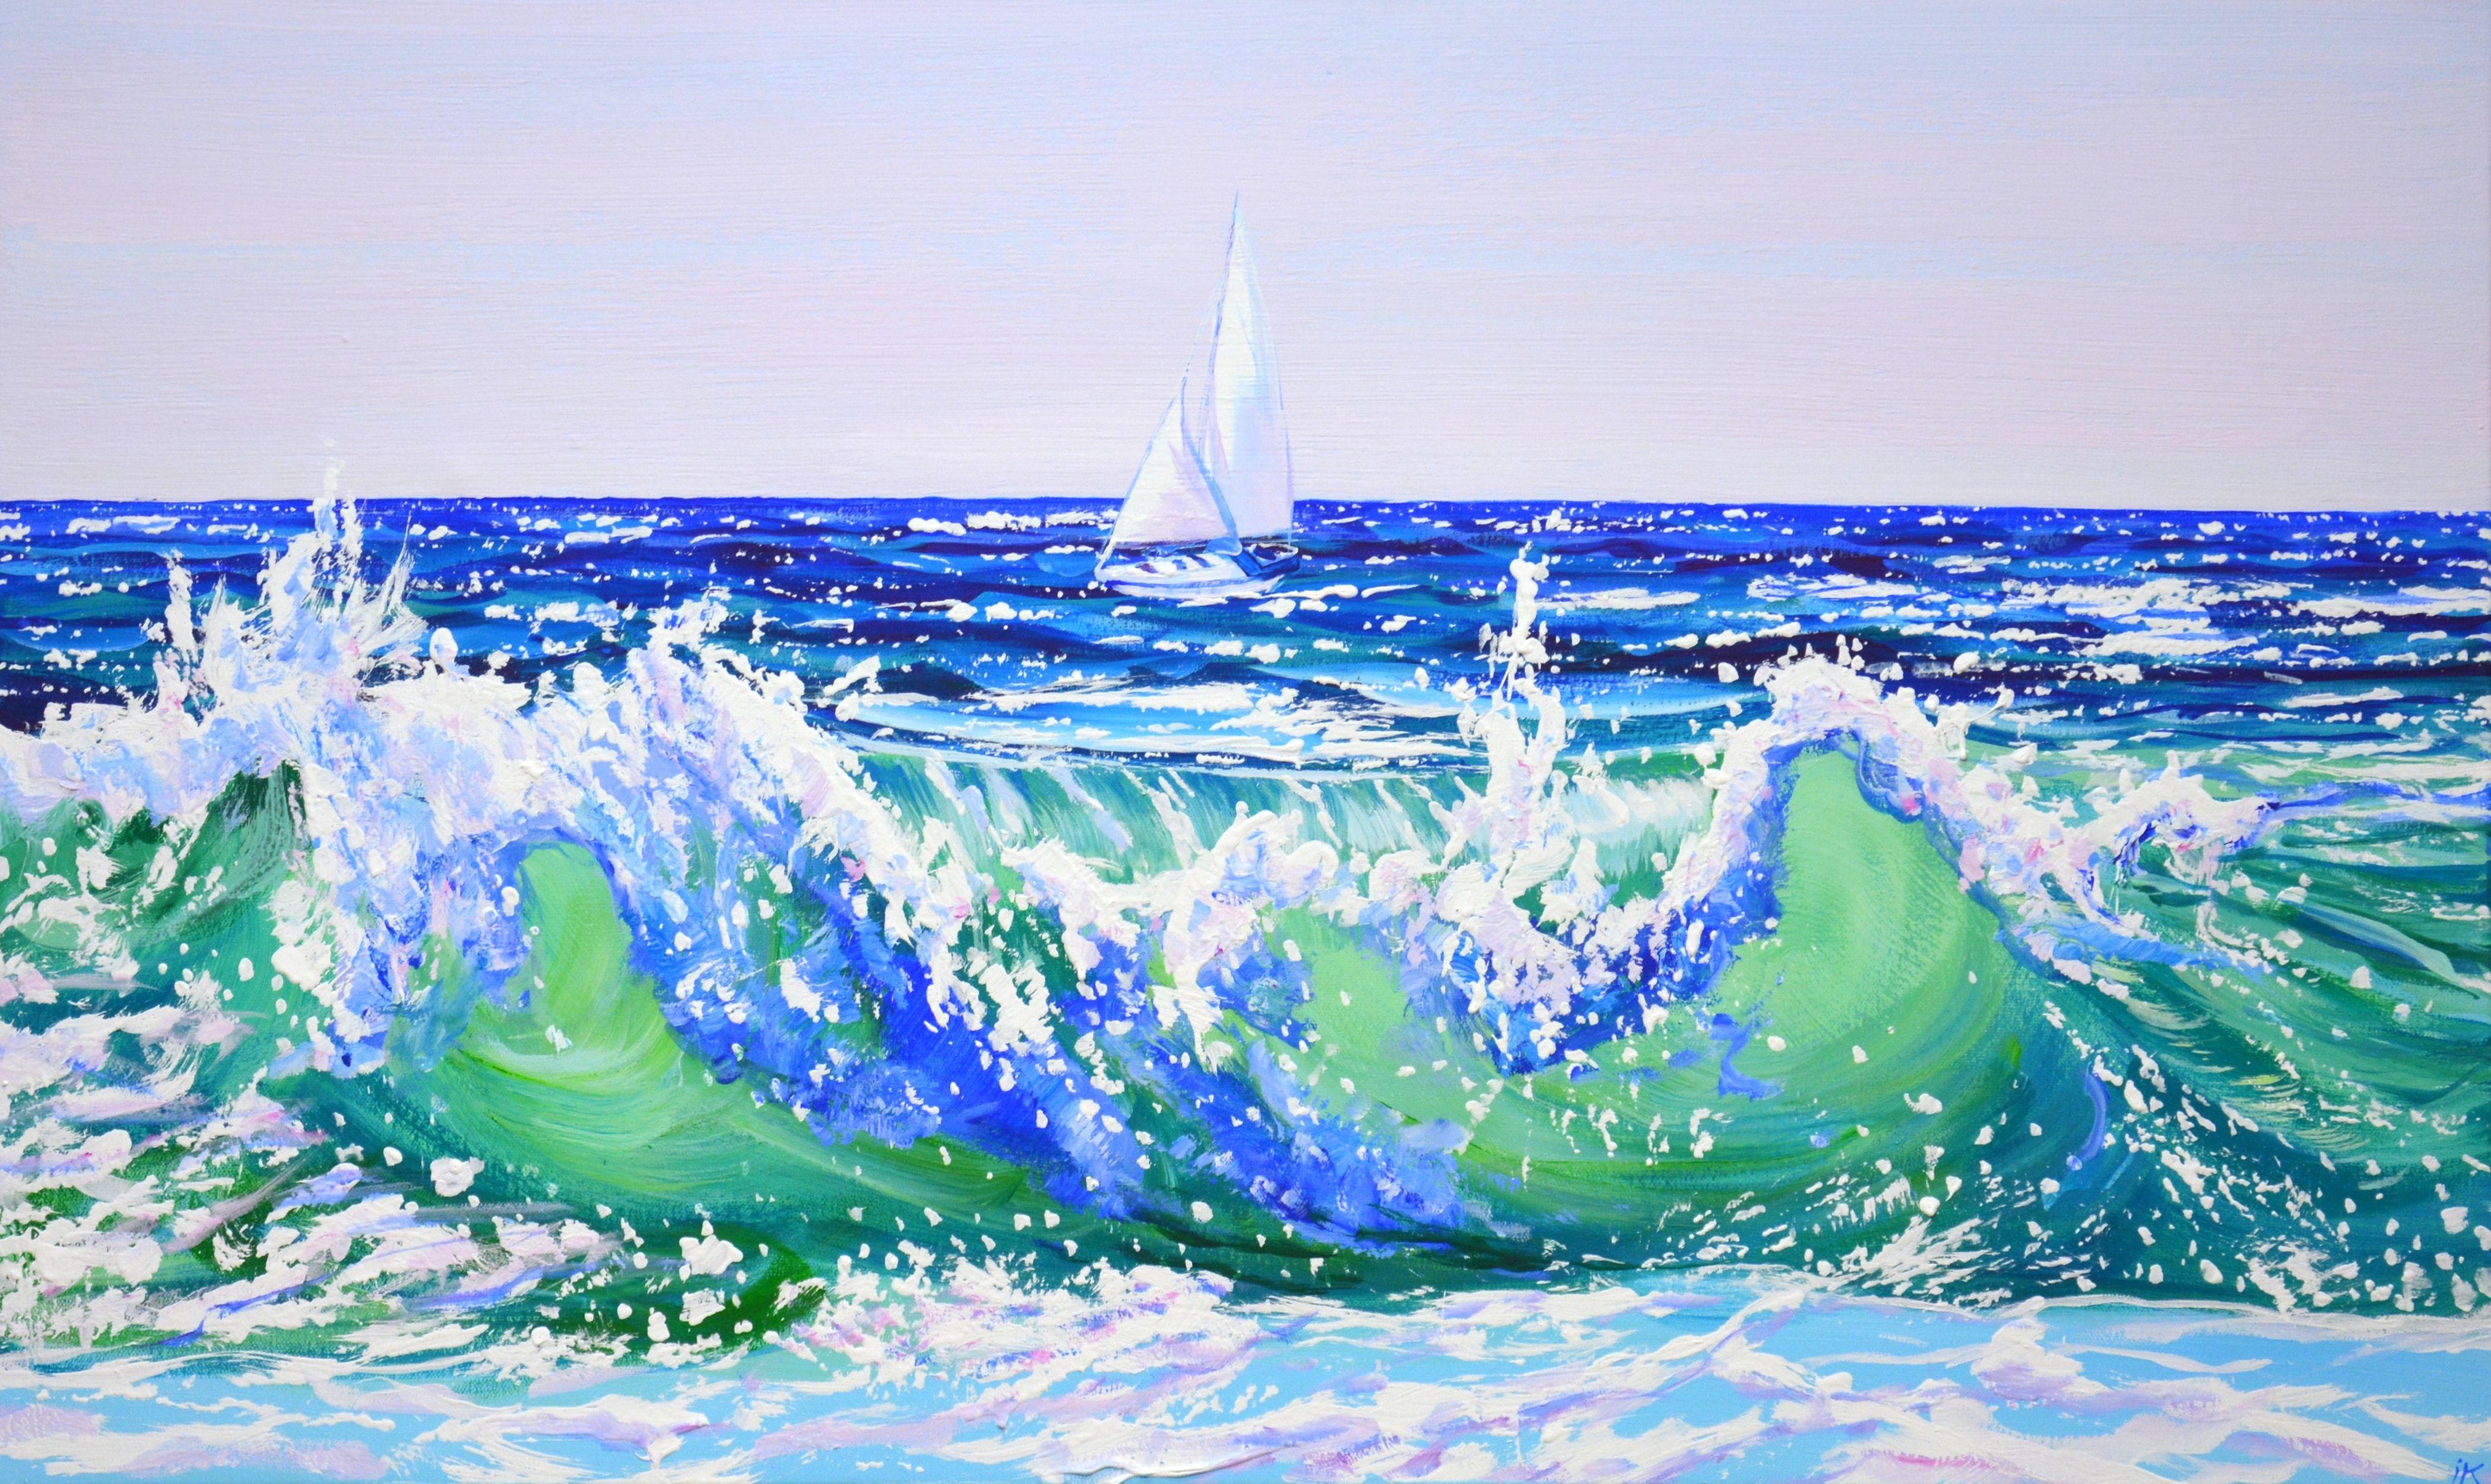 Sailing trip. The work is written with inspiration, positively. Nature: seascape, clear sky over the ocean, light reflected from the incoming waves, glare of the sun on the water, sea foam, sailboat on the water, create an atmosphere of relaxation.